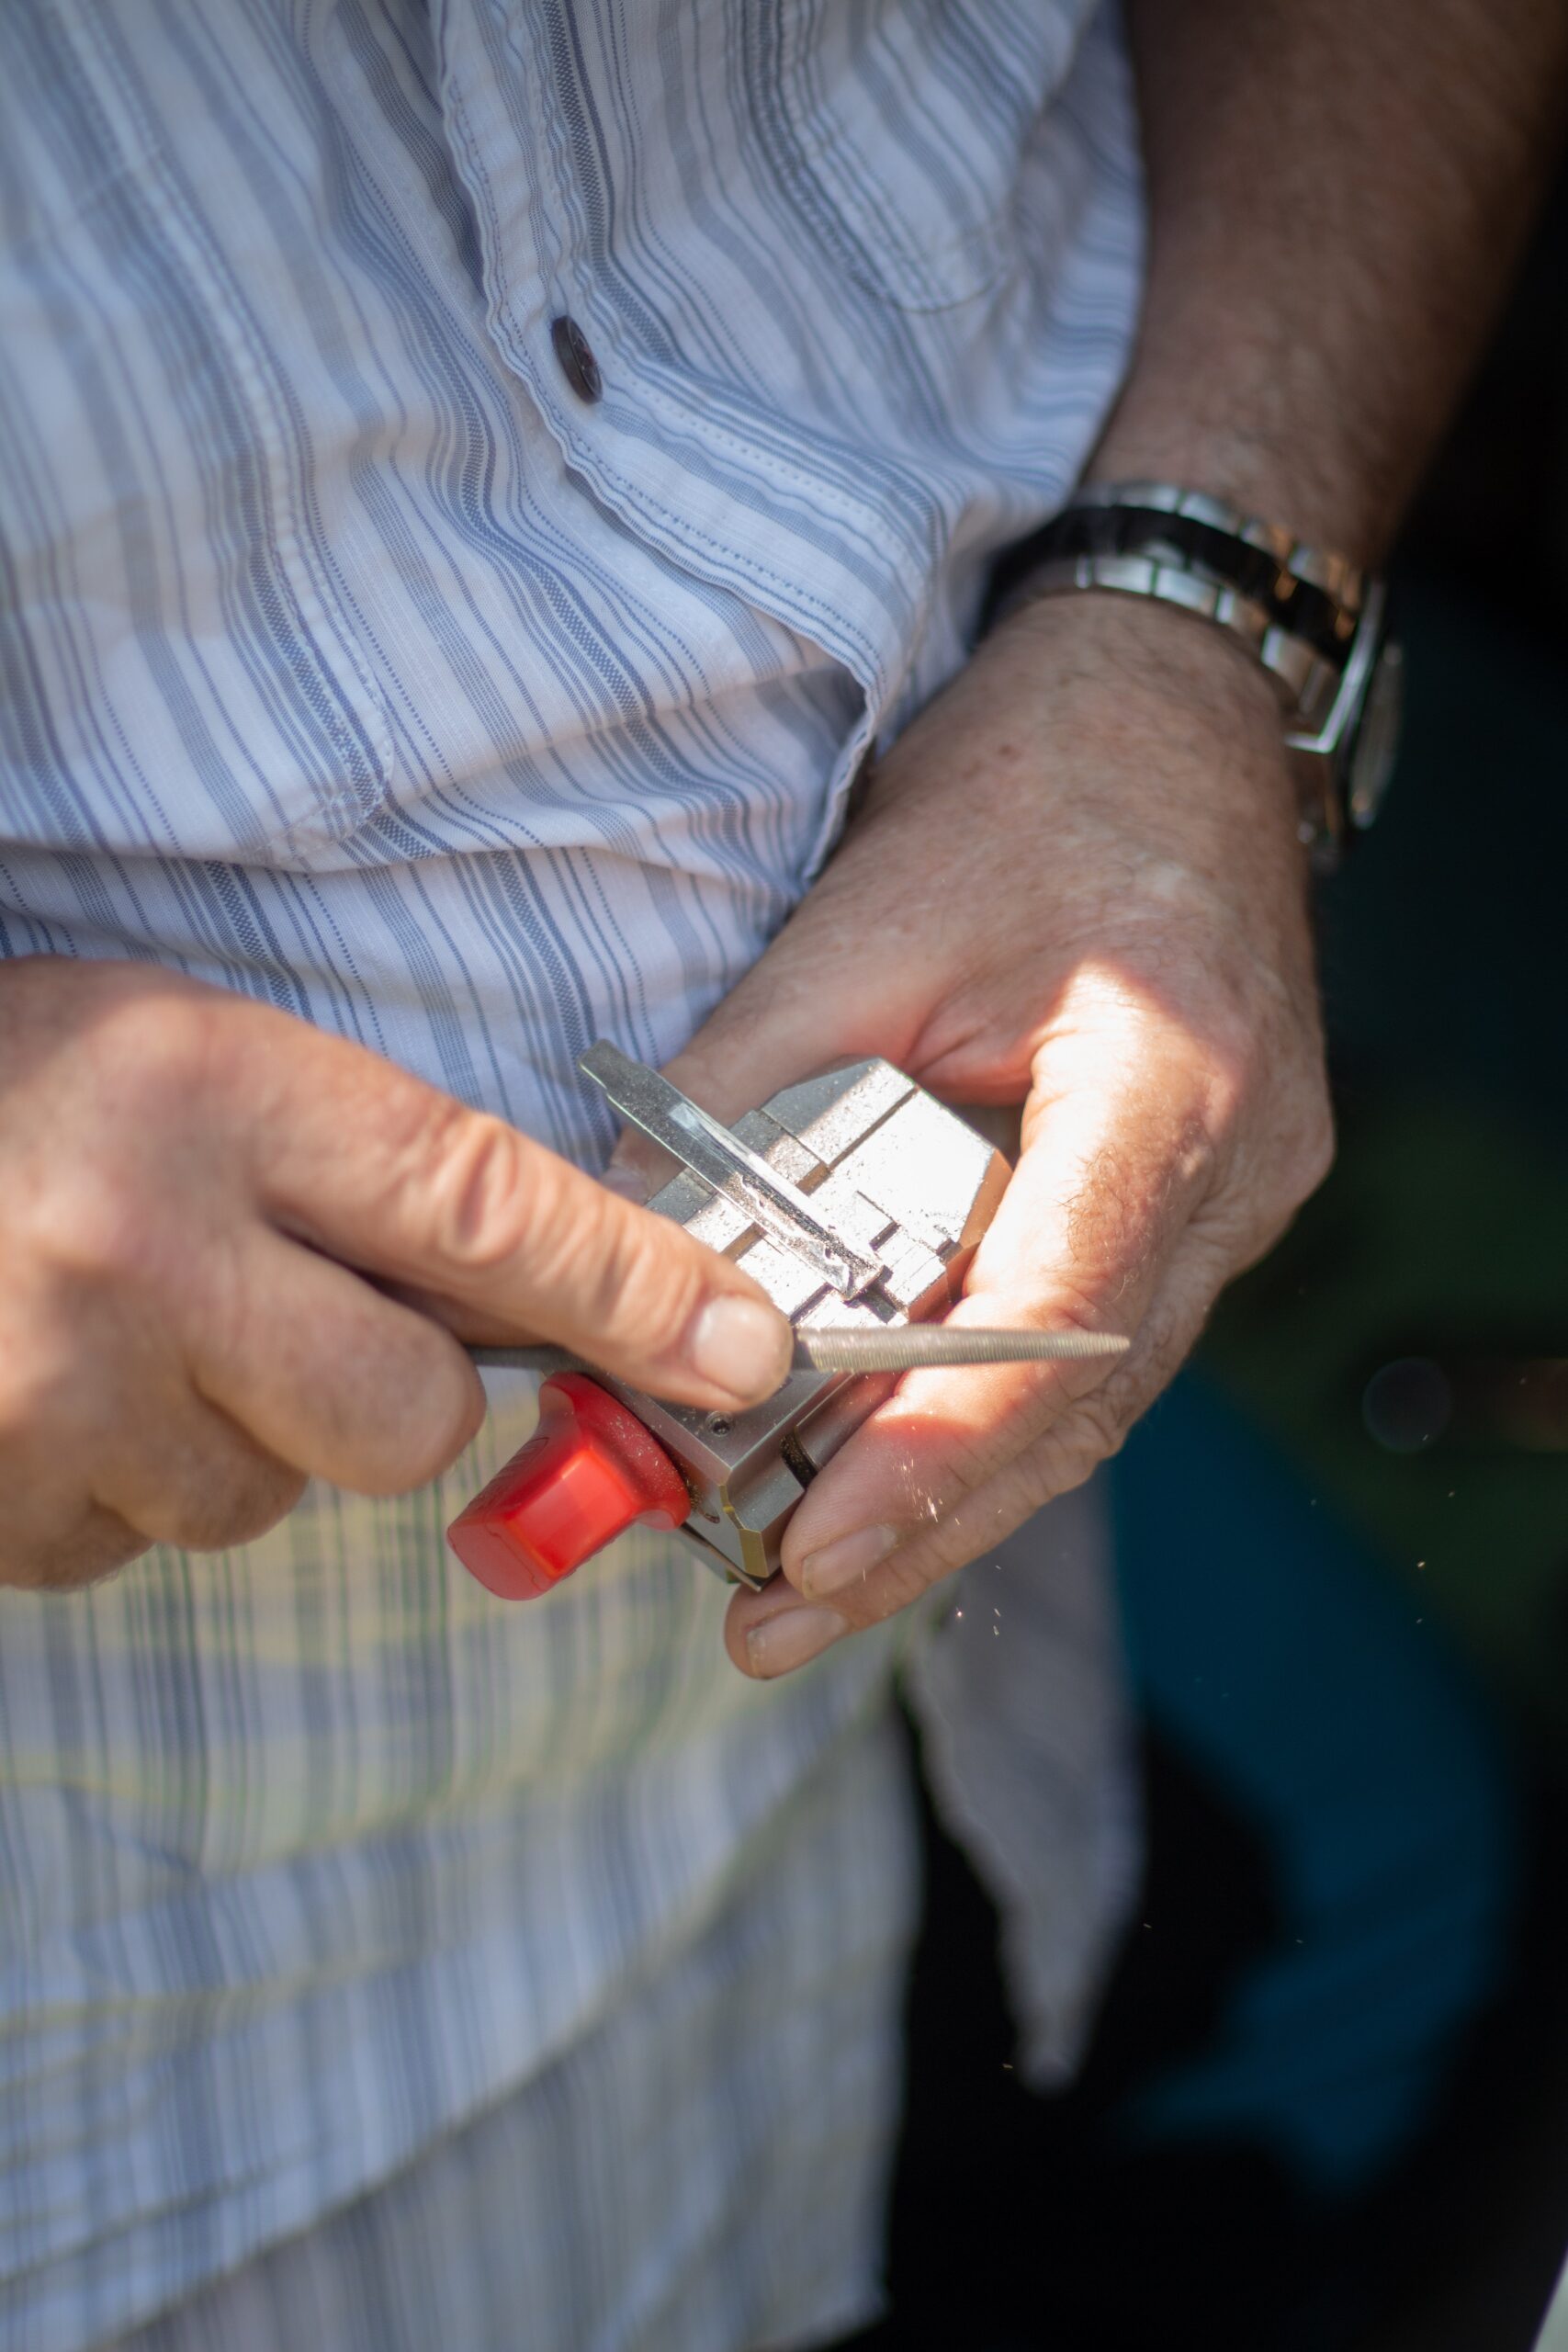 Emergency Locksmith Services When and Why You Might Need Them